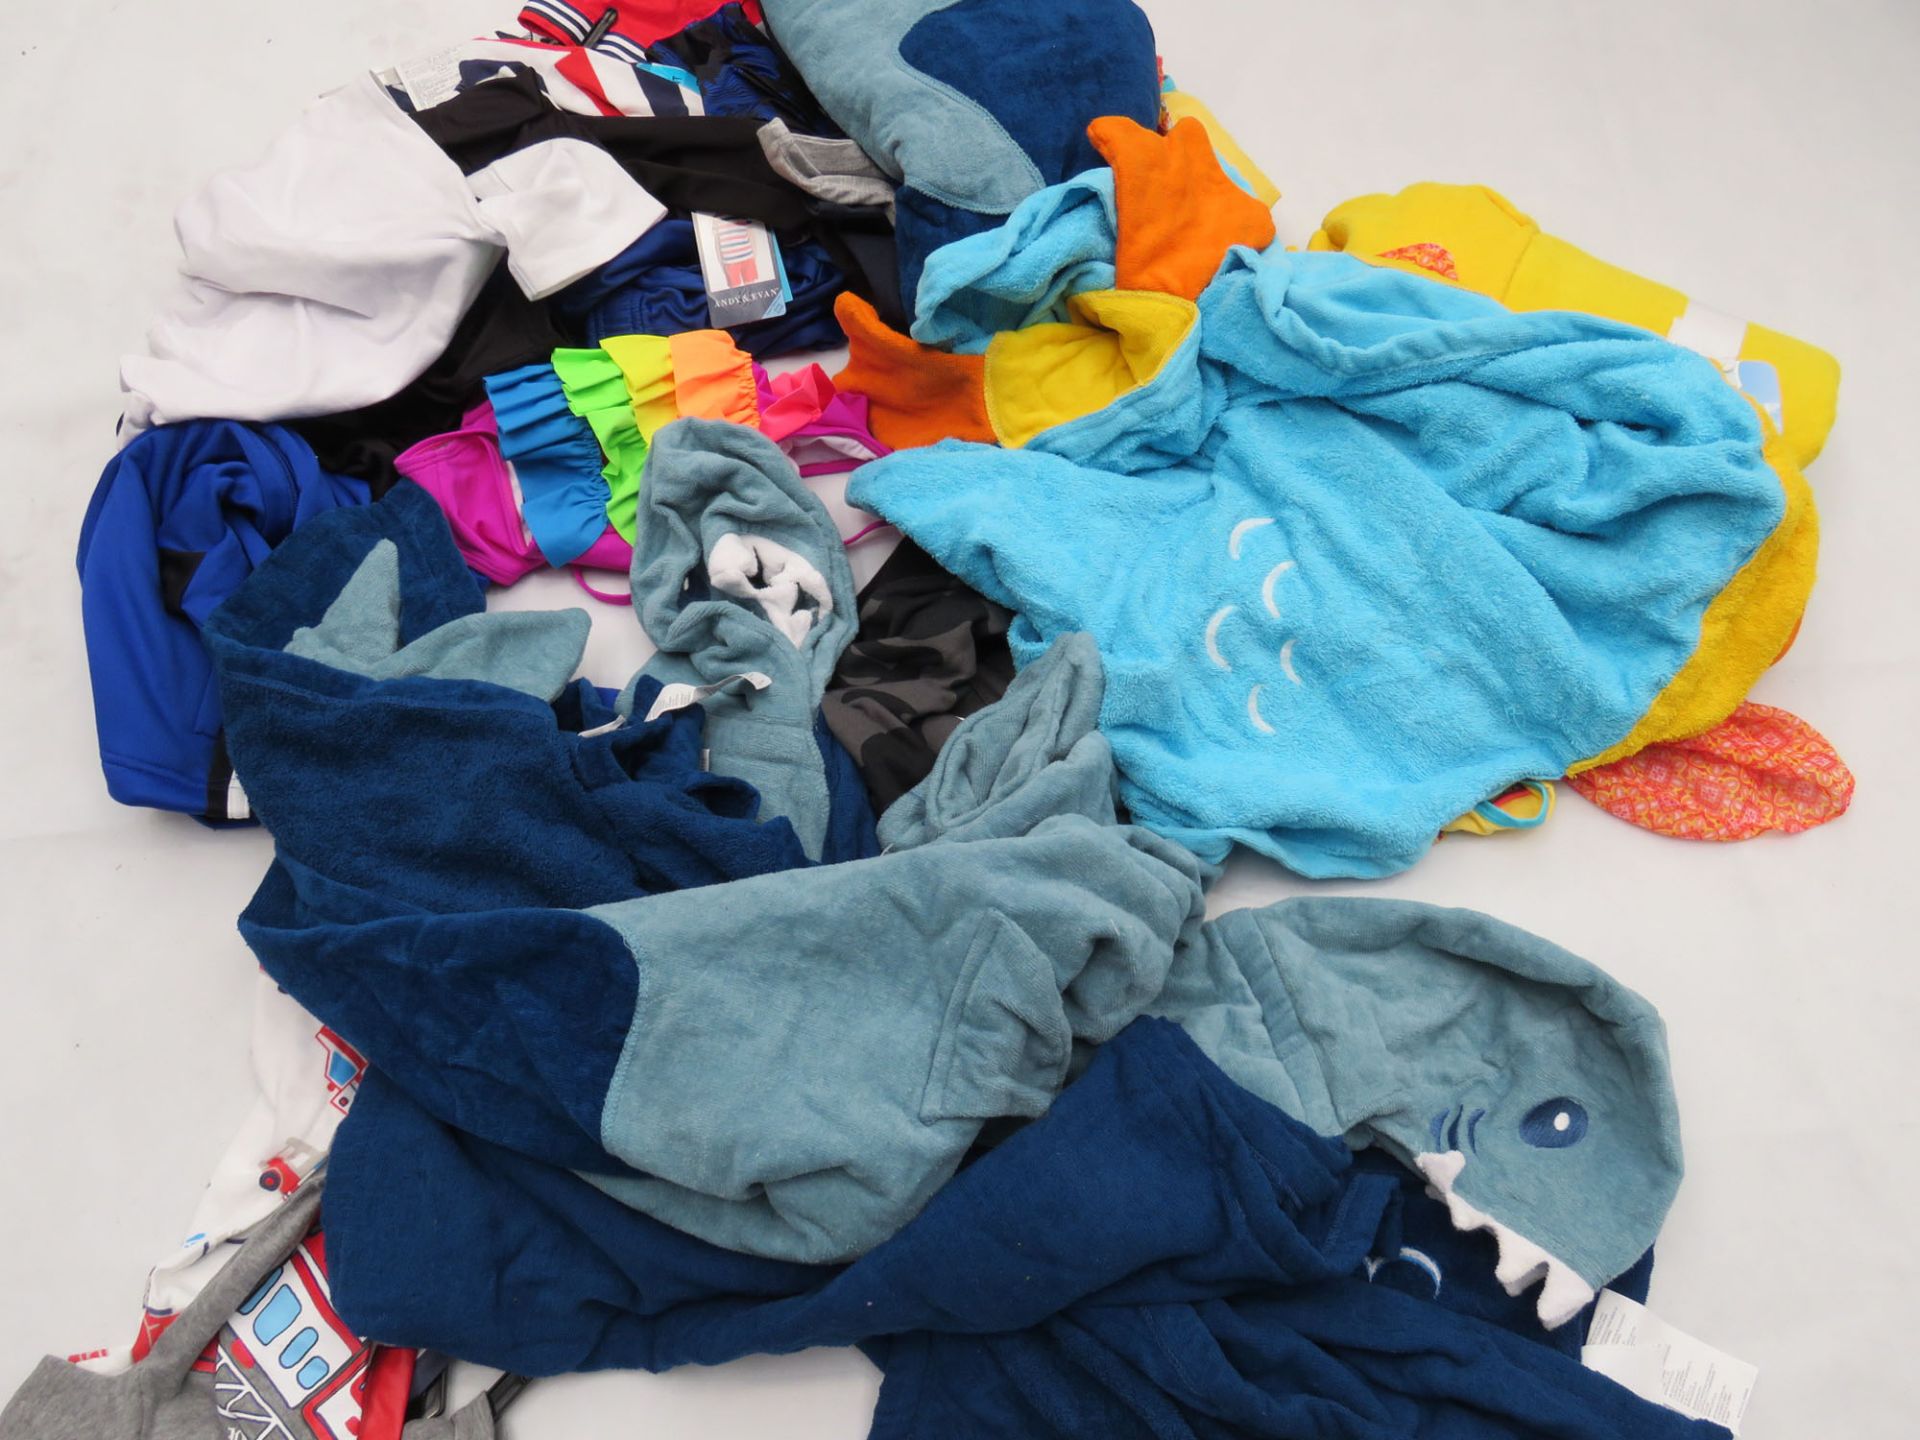 Large bag of mixed childrens clothing incl. sleep wear, etc.